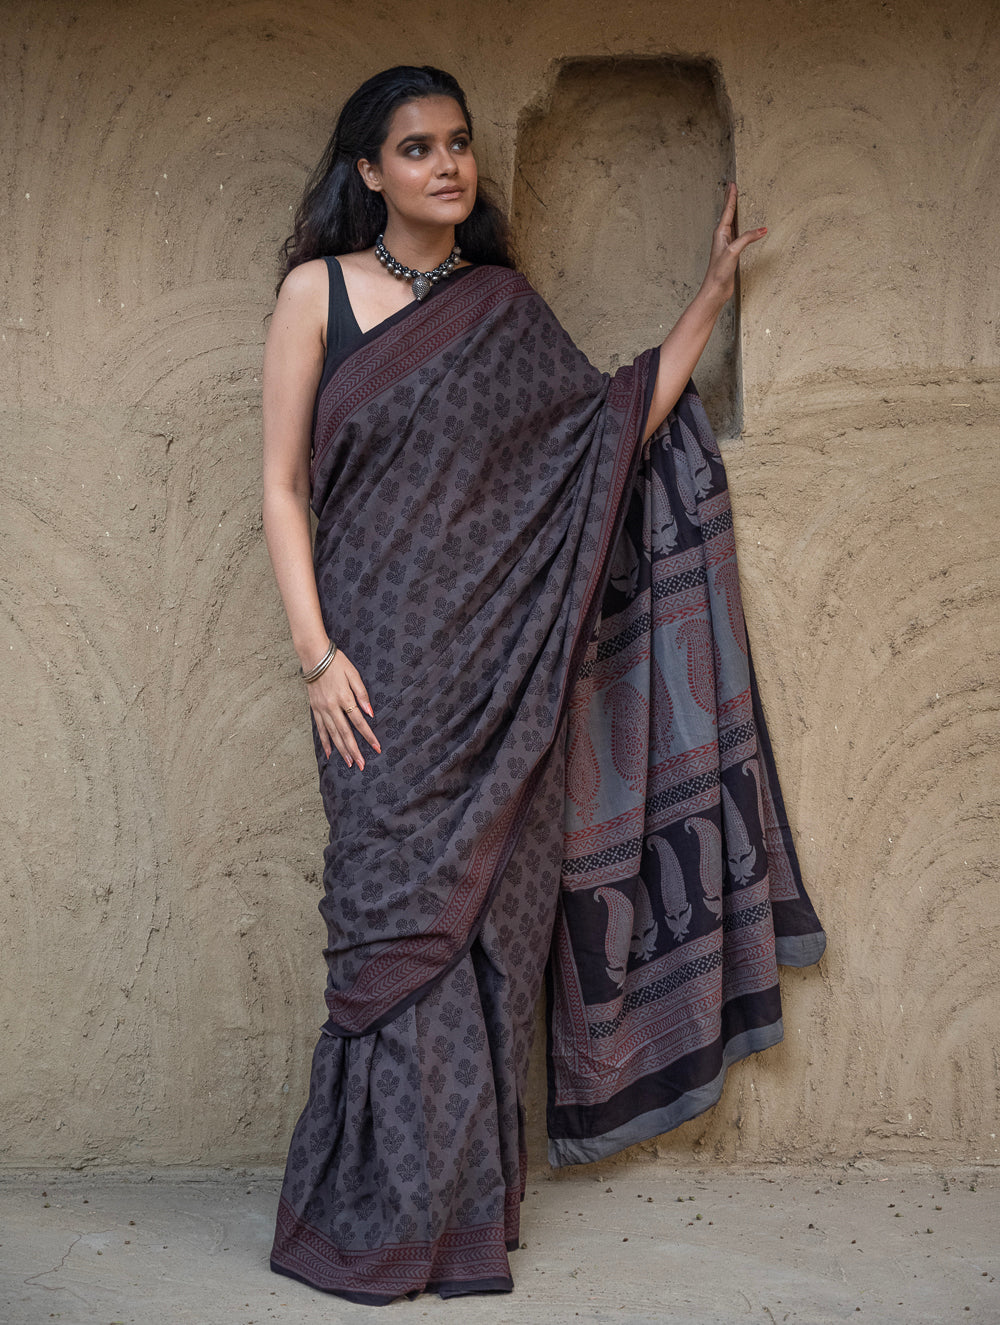 Load image into Gallery viewer, Exclusive Bagh Hand Block Printed Cotton Saree - Black Flora